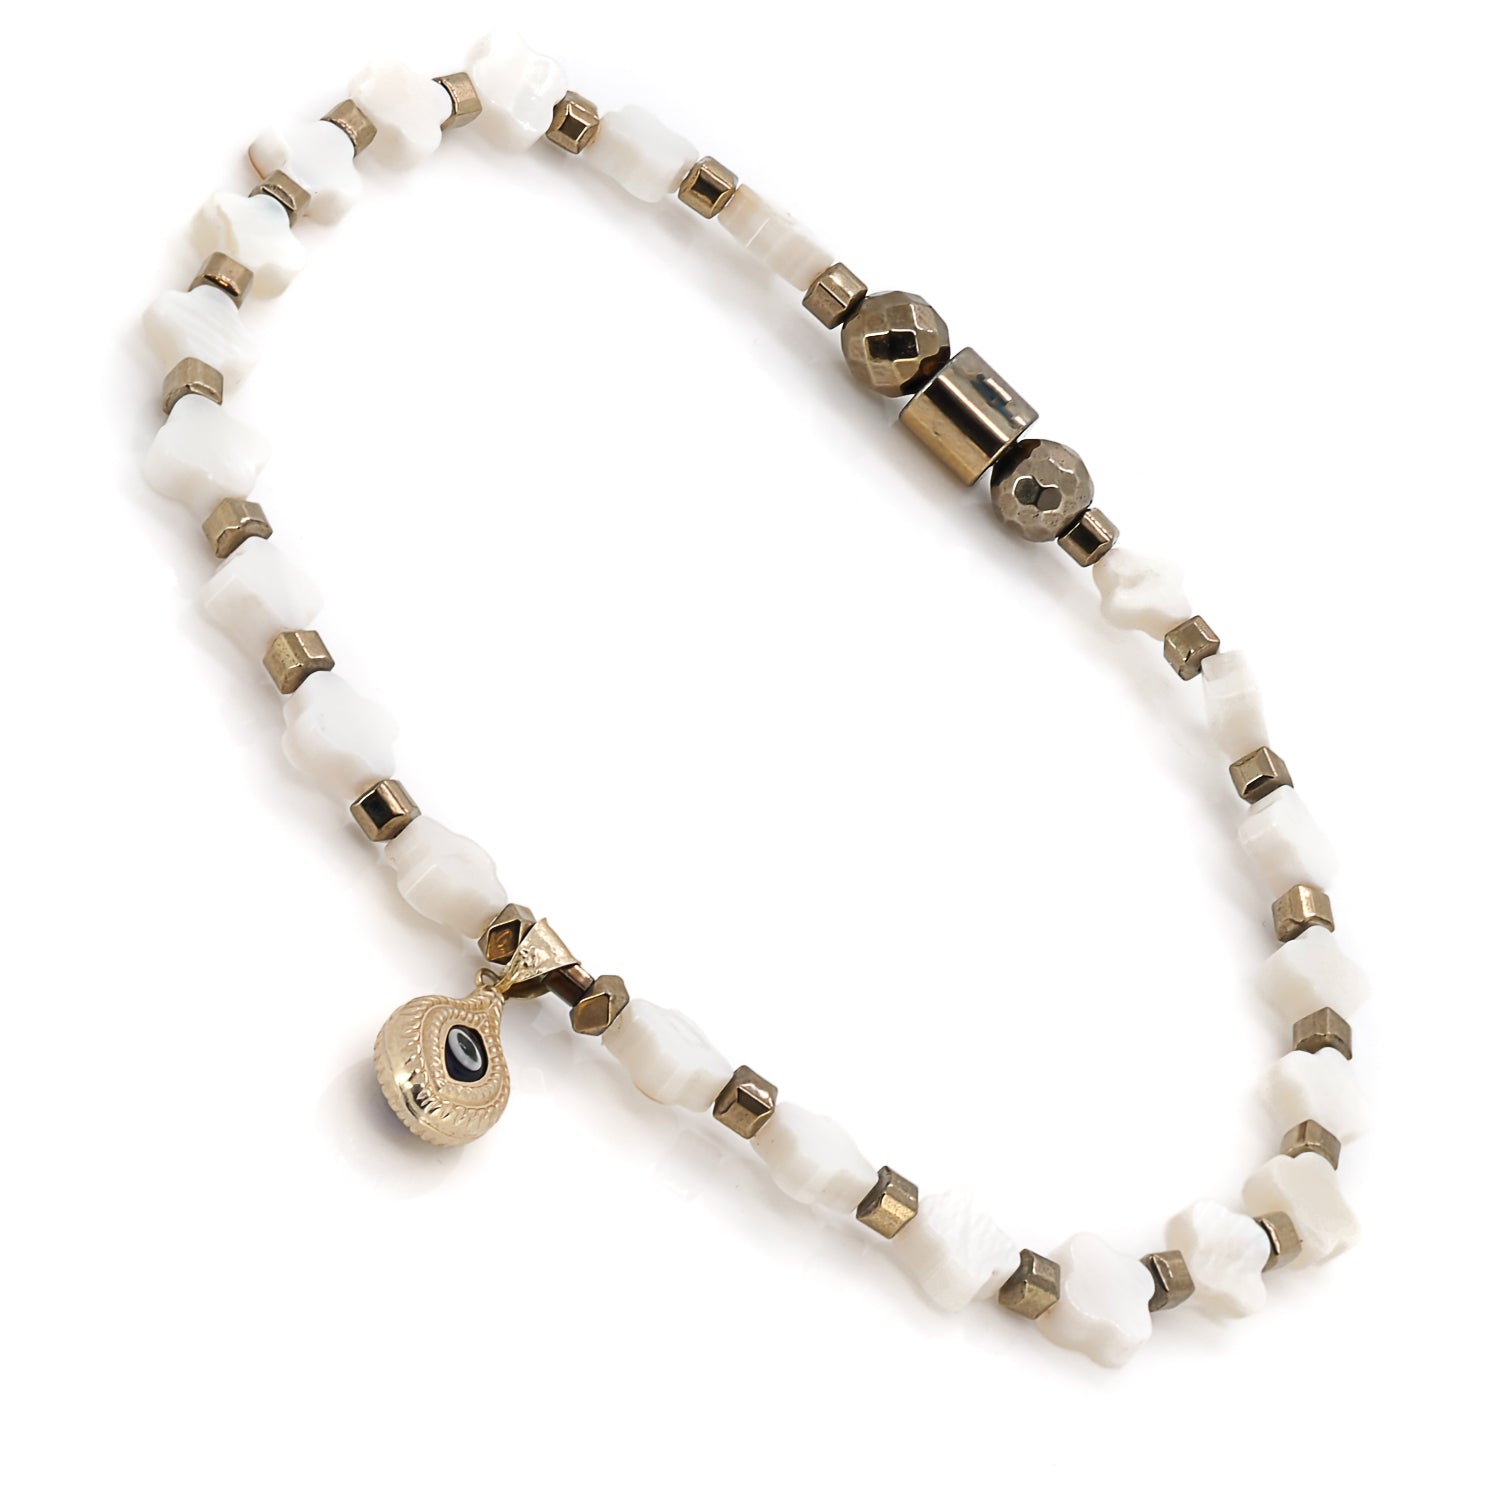 Meticulously Crafted Clover Pearls - Elegance meets symbolism.